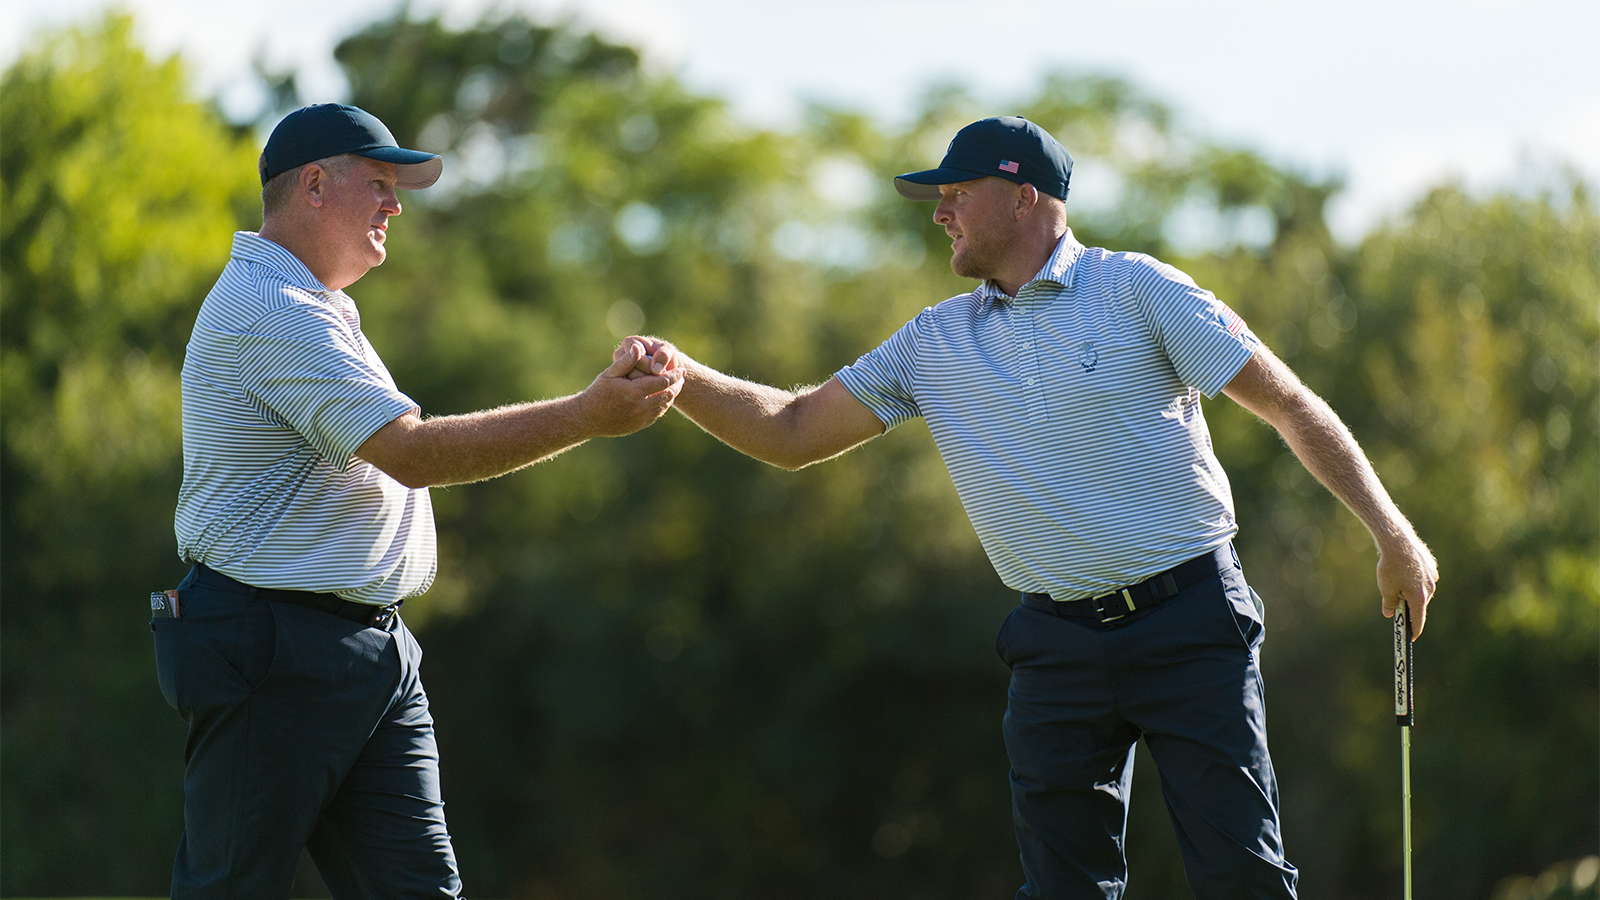 Bob Sowards of the United States and Ryan Vermeer of the United States shake hands on the 13th hole during the Afternoon Foursomes for the 29th PGA Cup held at the Omni Barton Creek Resort & Spa on September 27, 2019 in Austin, Texas. (Photo by Hailey Garrett/PGA of America)